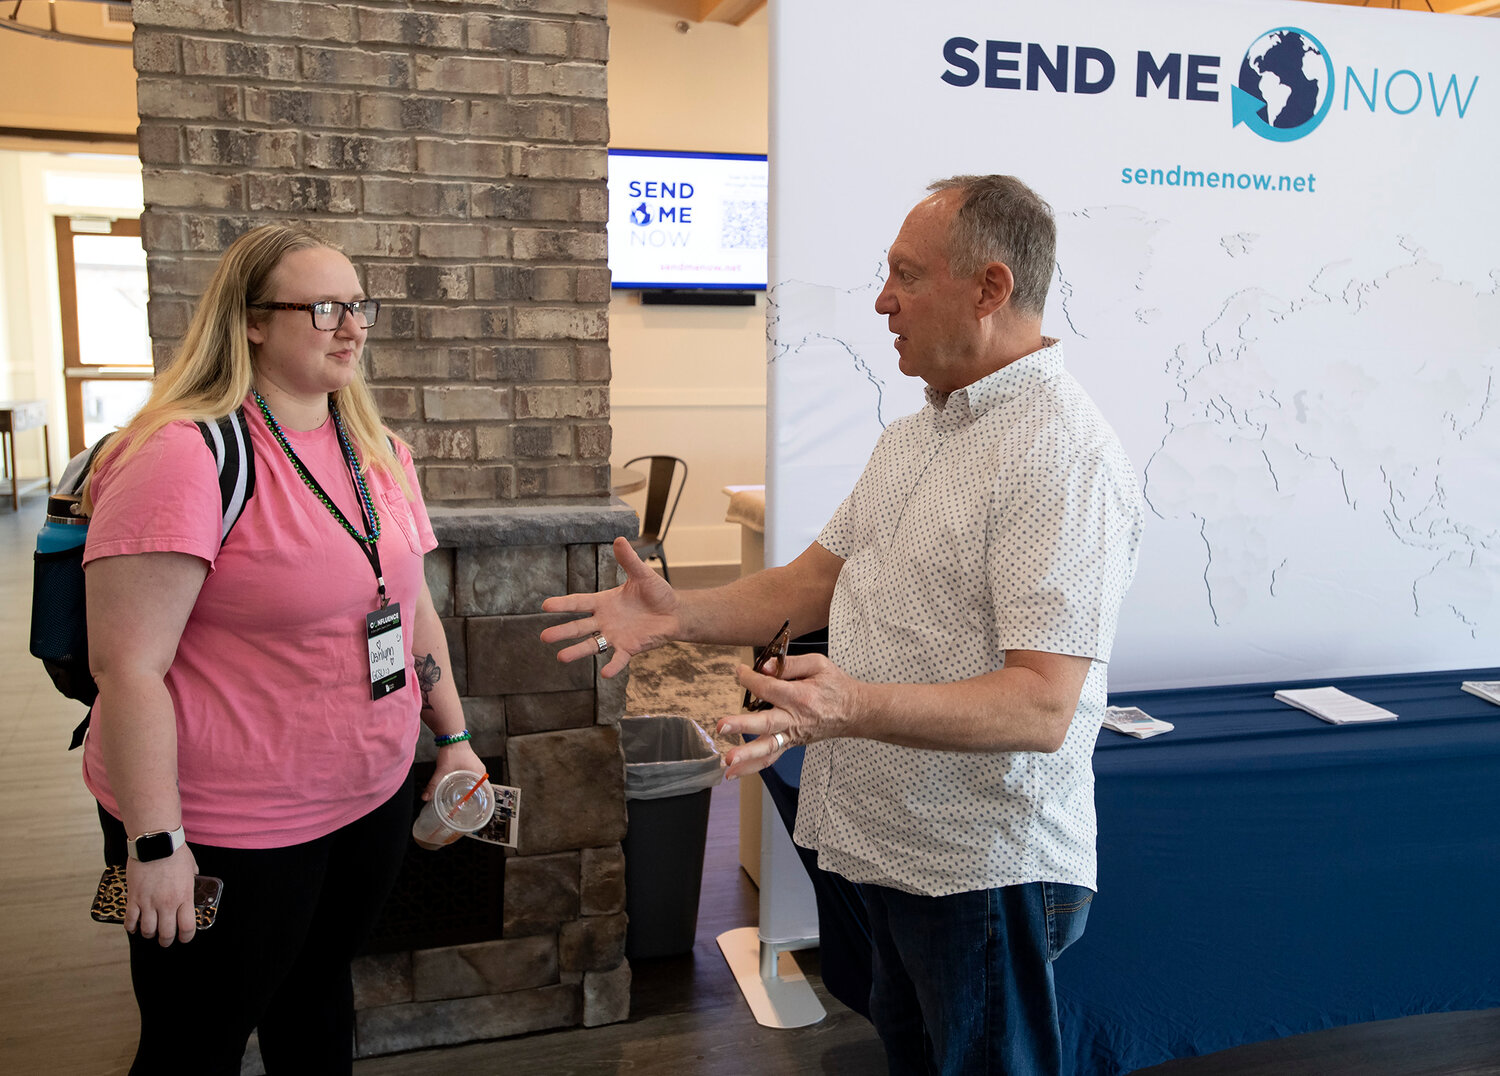 Warren Skinner with Send Me Now speaks to GCSU student Ashlynn Phillips during Confluence 2023 at Eagle's Landing First Baptist Church in McDonough, Ga., Saturday, Sept. 23, 2023. (Index/Henry Durand)